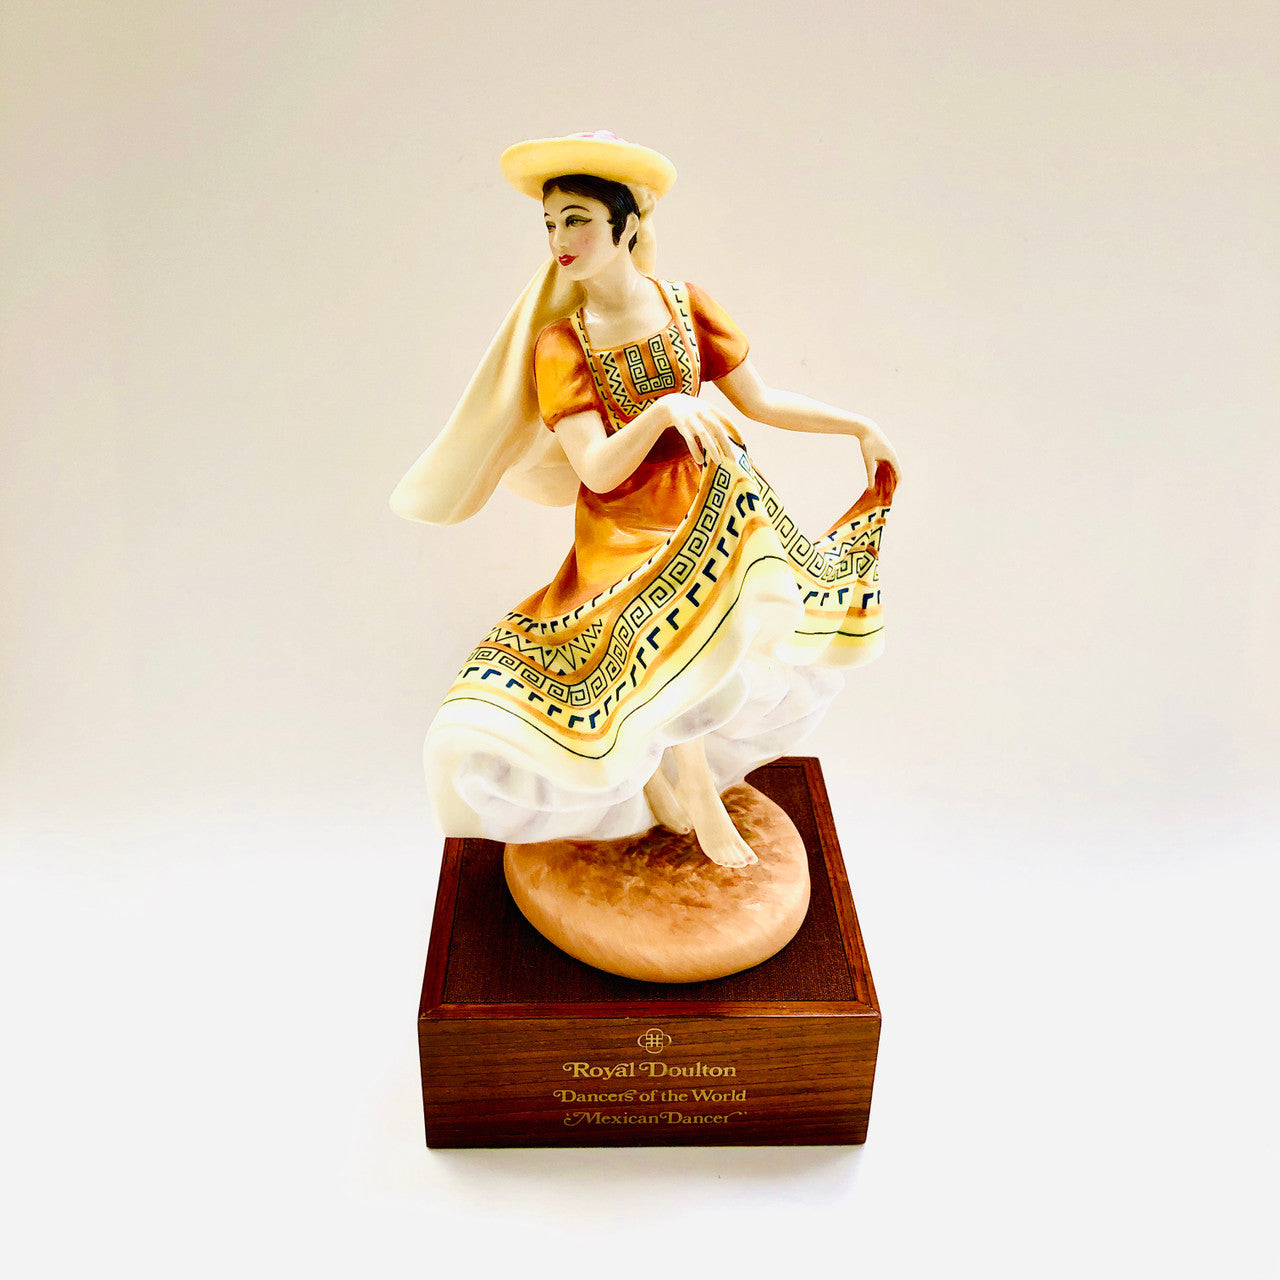 Royal Doulton, Dancers of the World, Mexican Dancer, Mexico, HN 2866, Figurine, Ceramic, Limited Edition, 1979, Peggy Davies, with Certificate